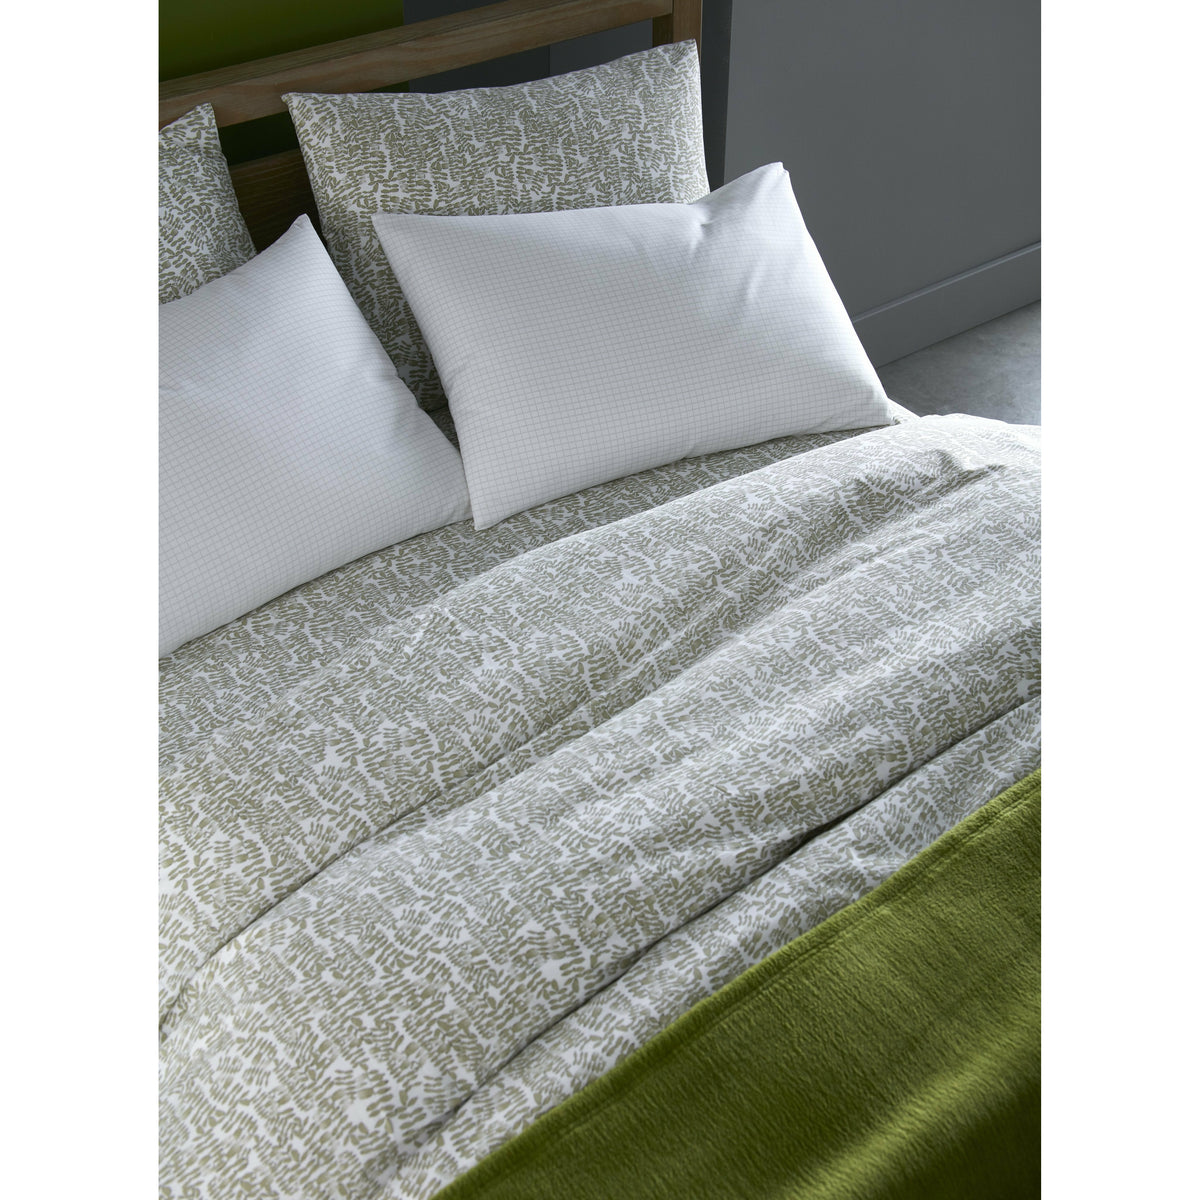 Peacock Alley Fern Bedding Lifestyle Olive Fine Linens